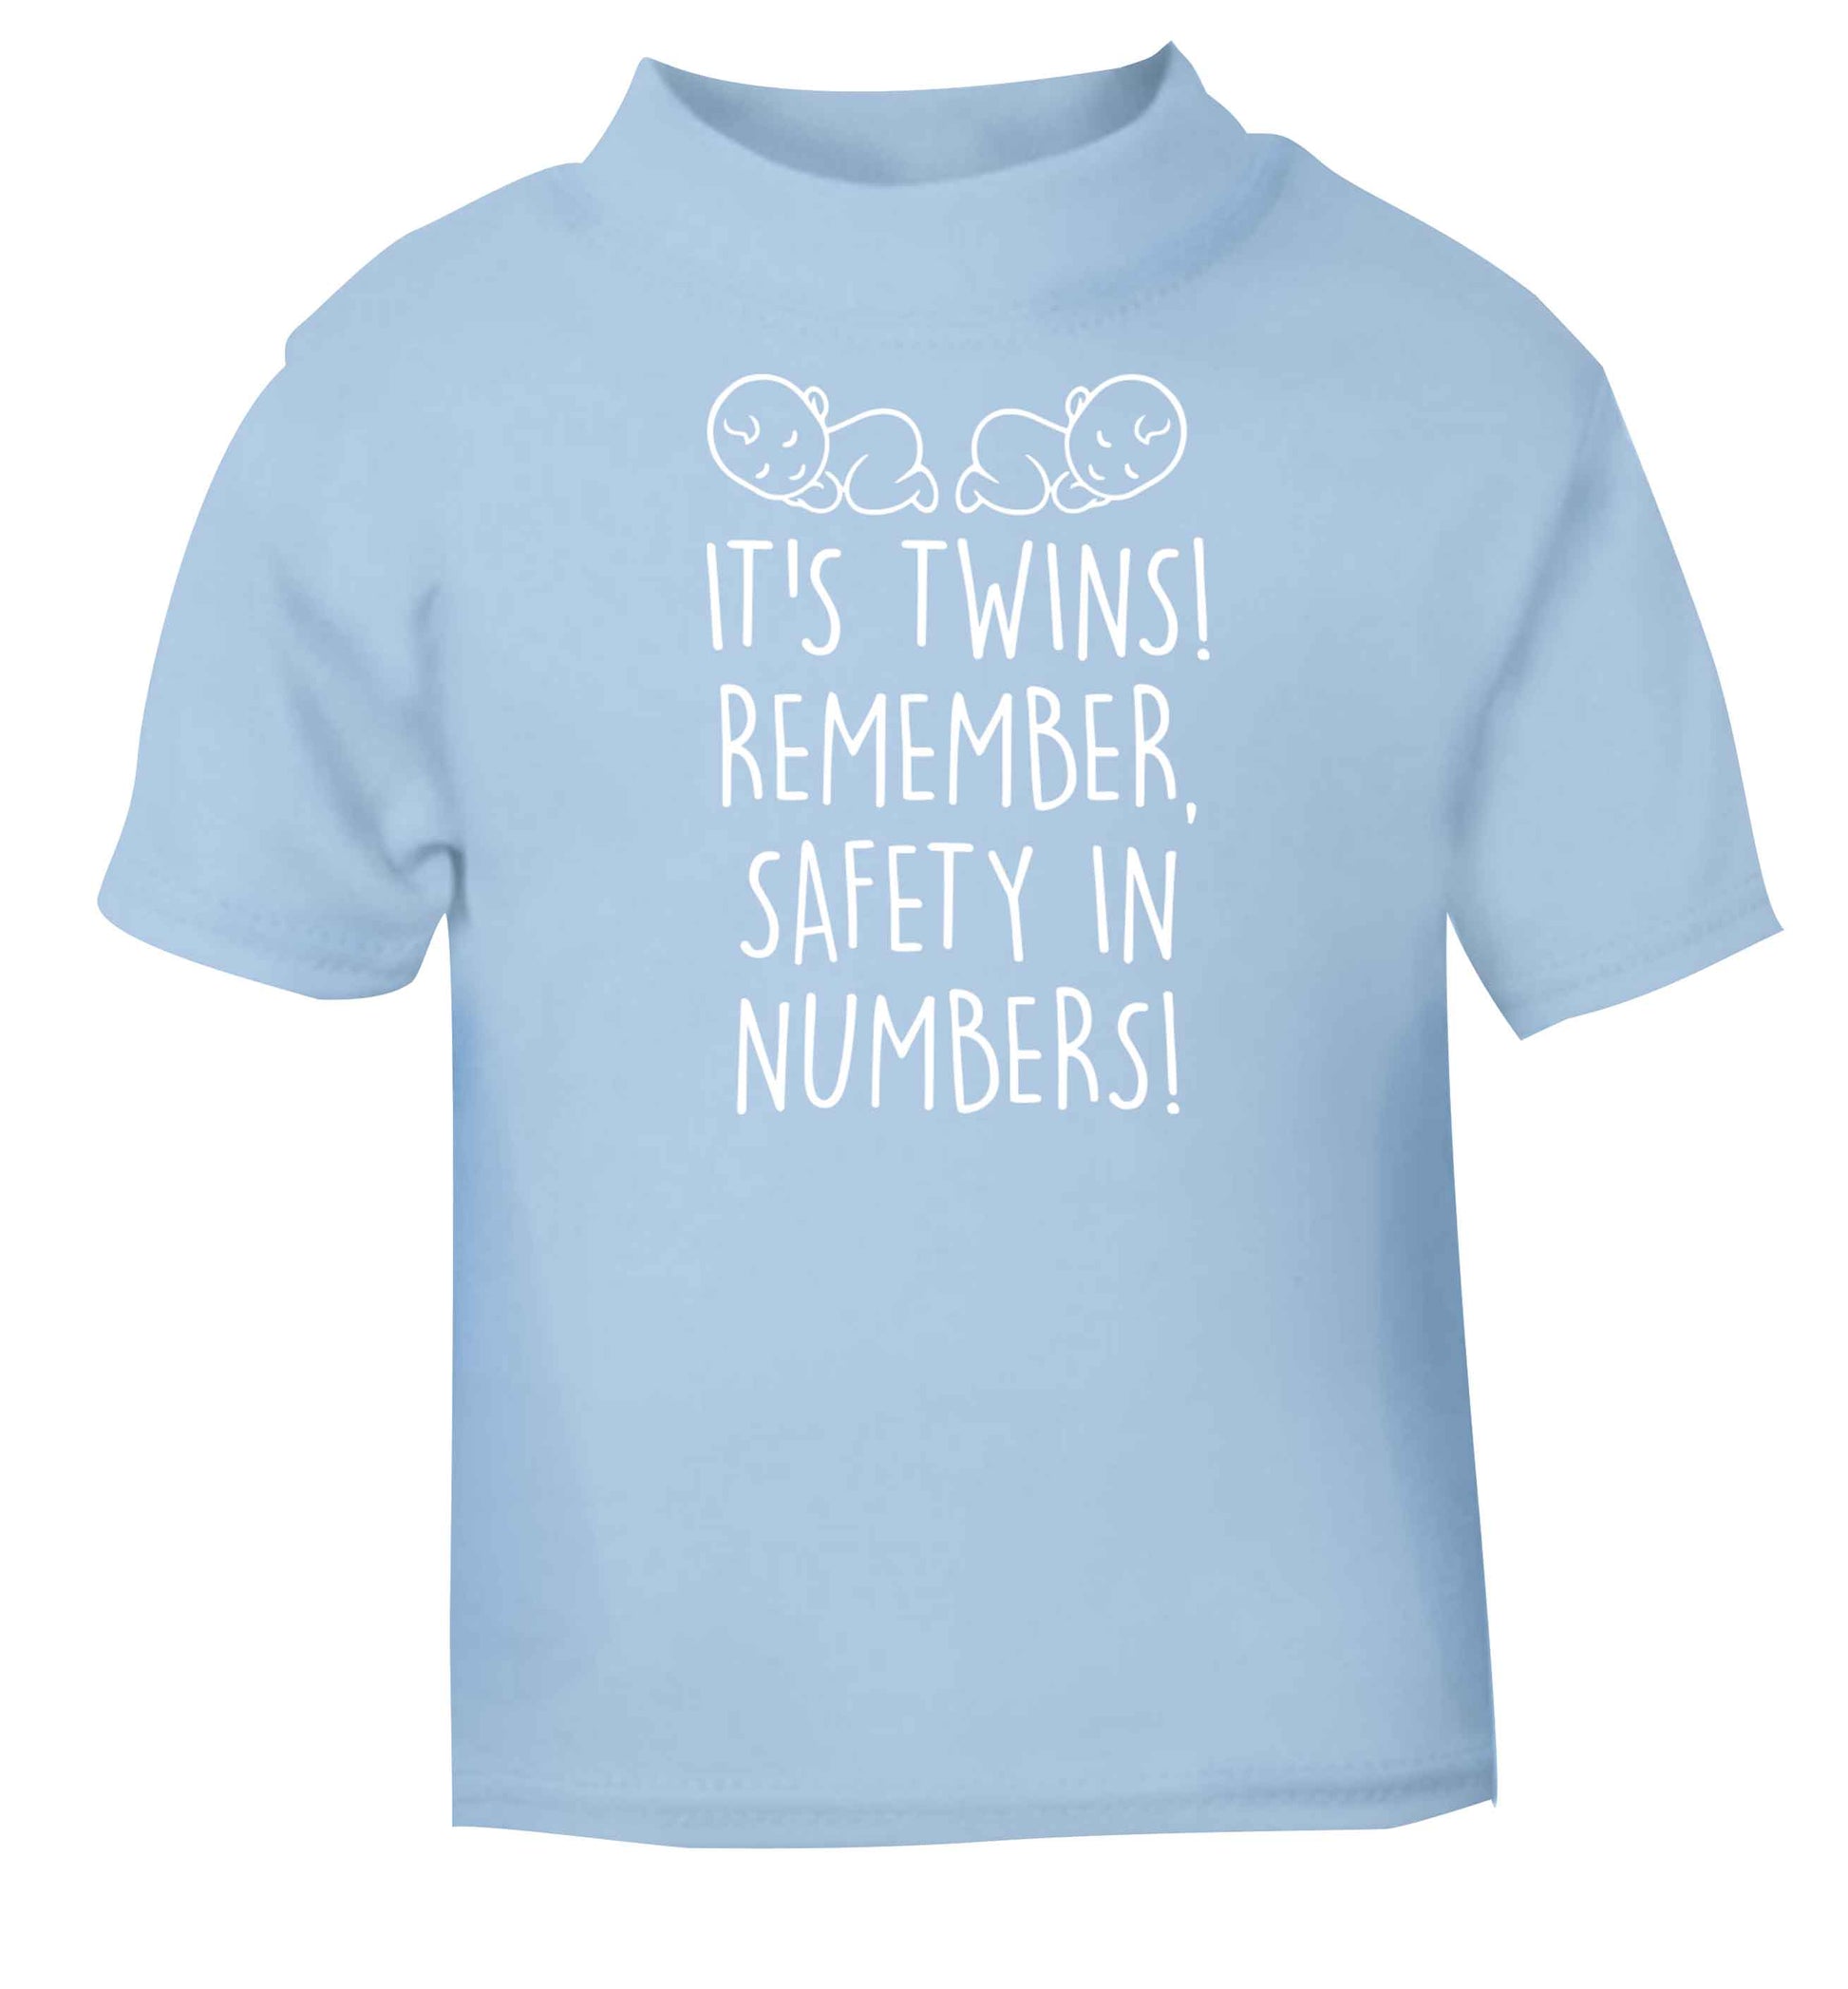 It's twins! Remember safety in numbers! light blue baby toddler Tshirt 2 Years